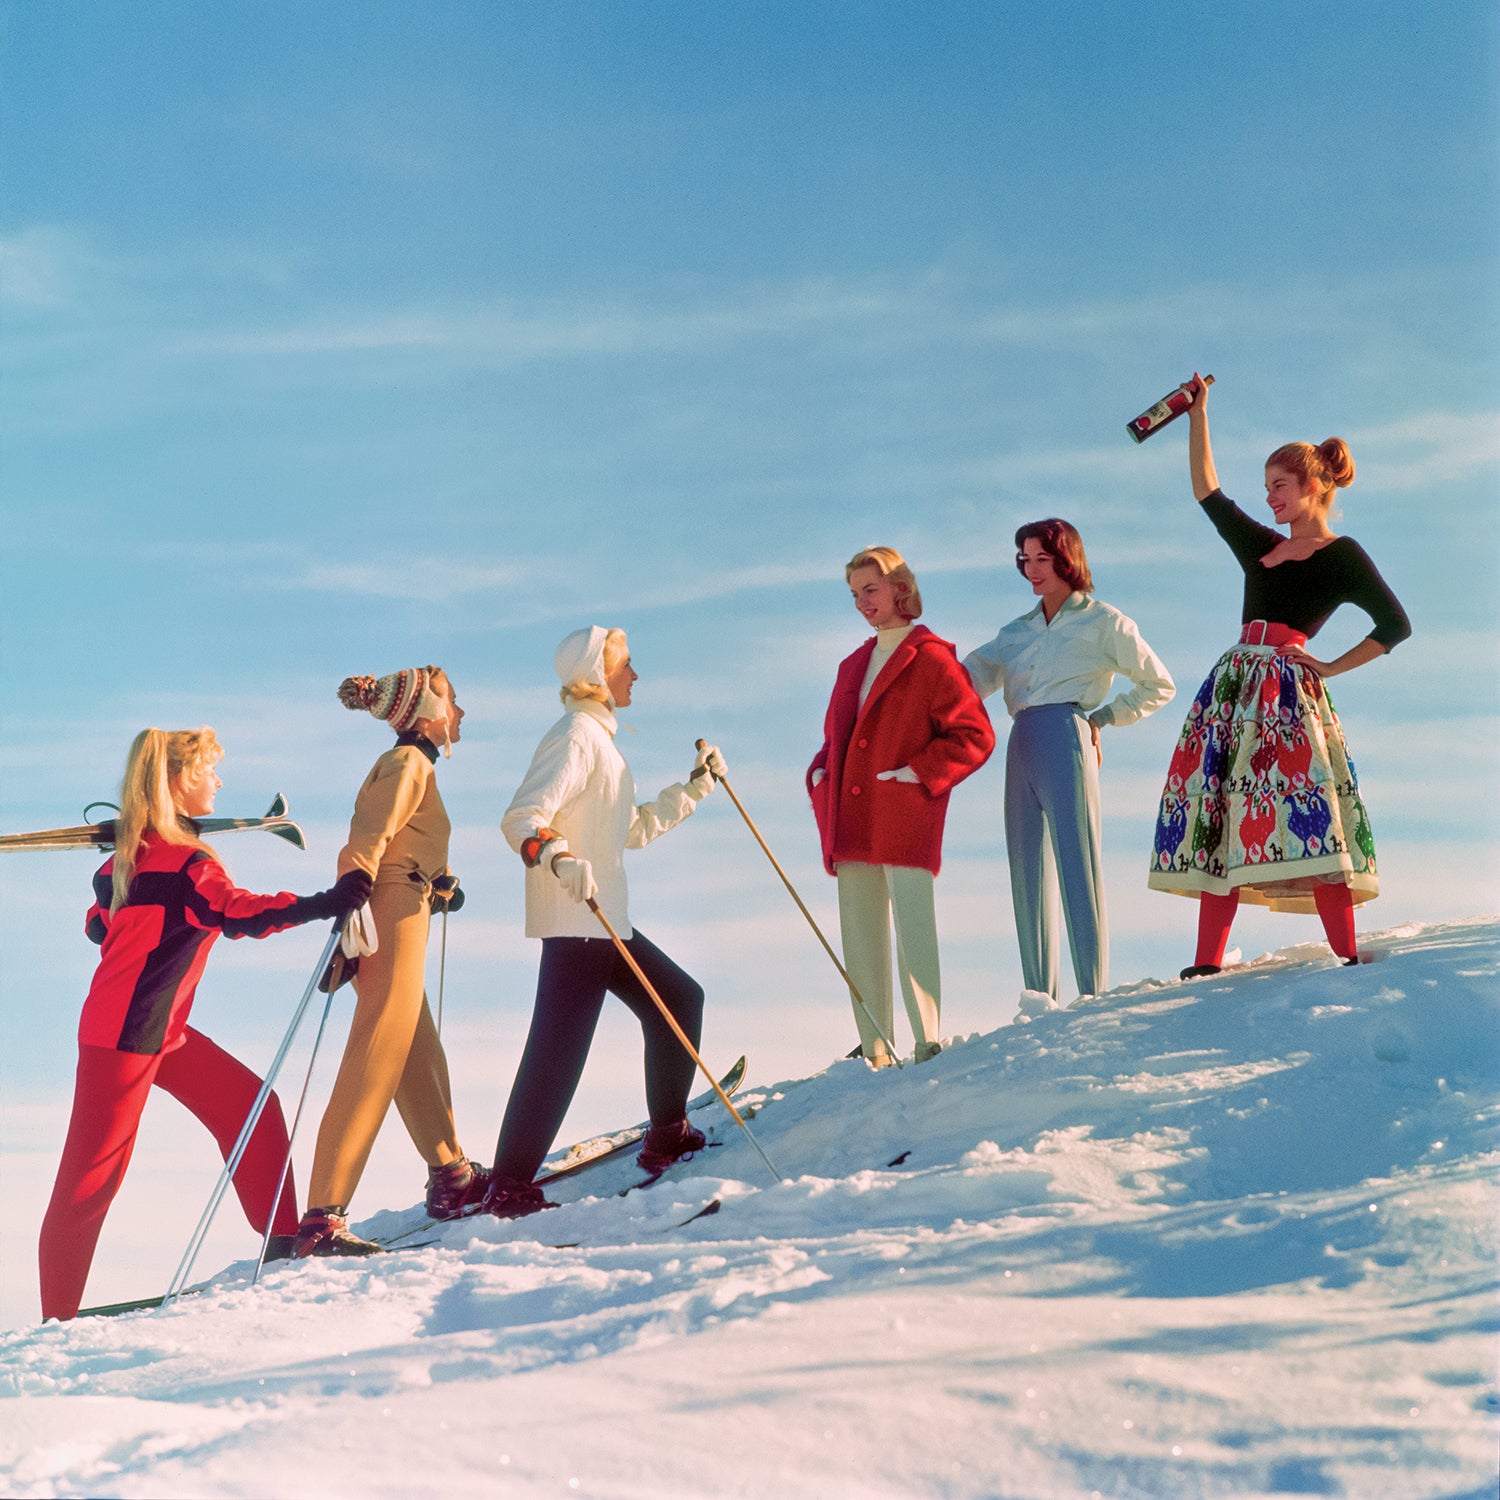 What Do You Really Need for a Proper Après-Ski Session?